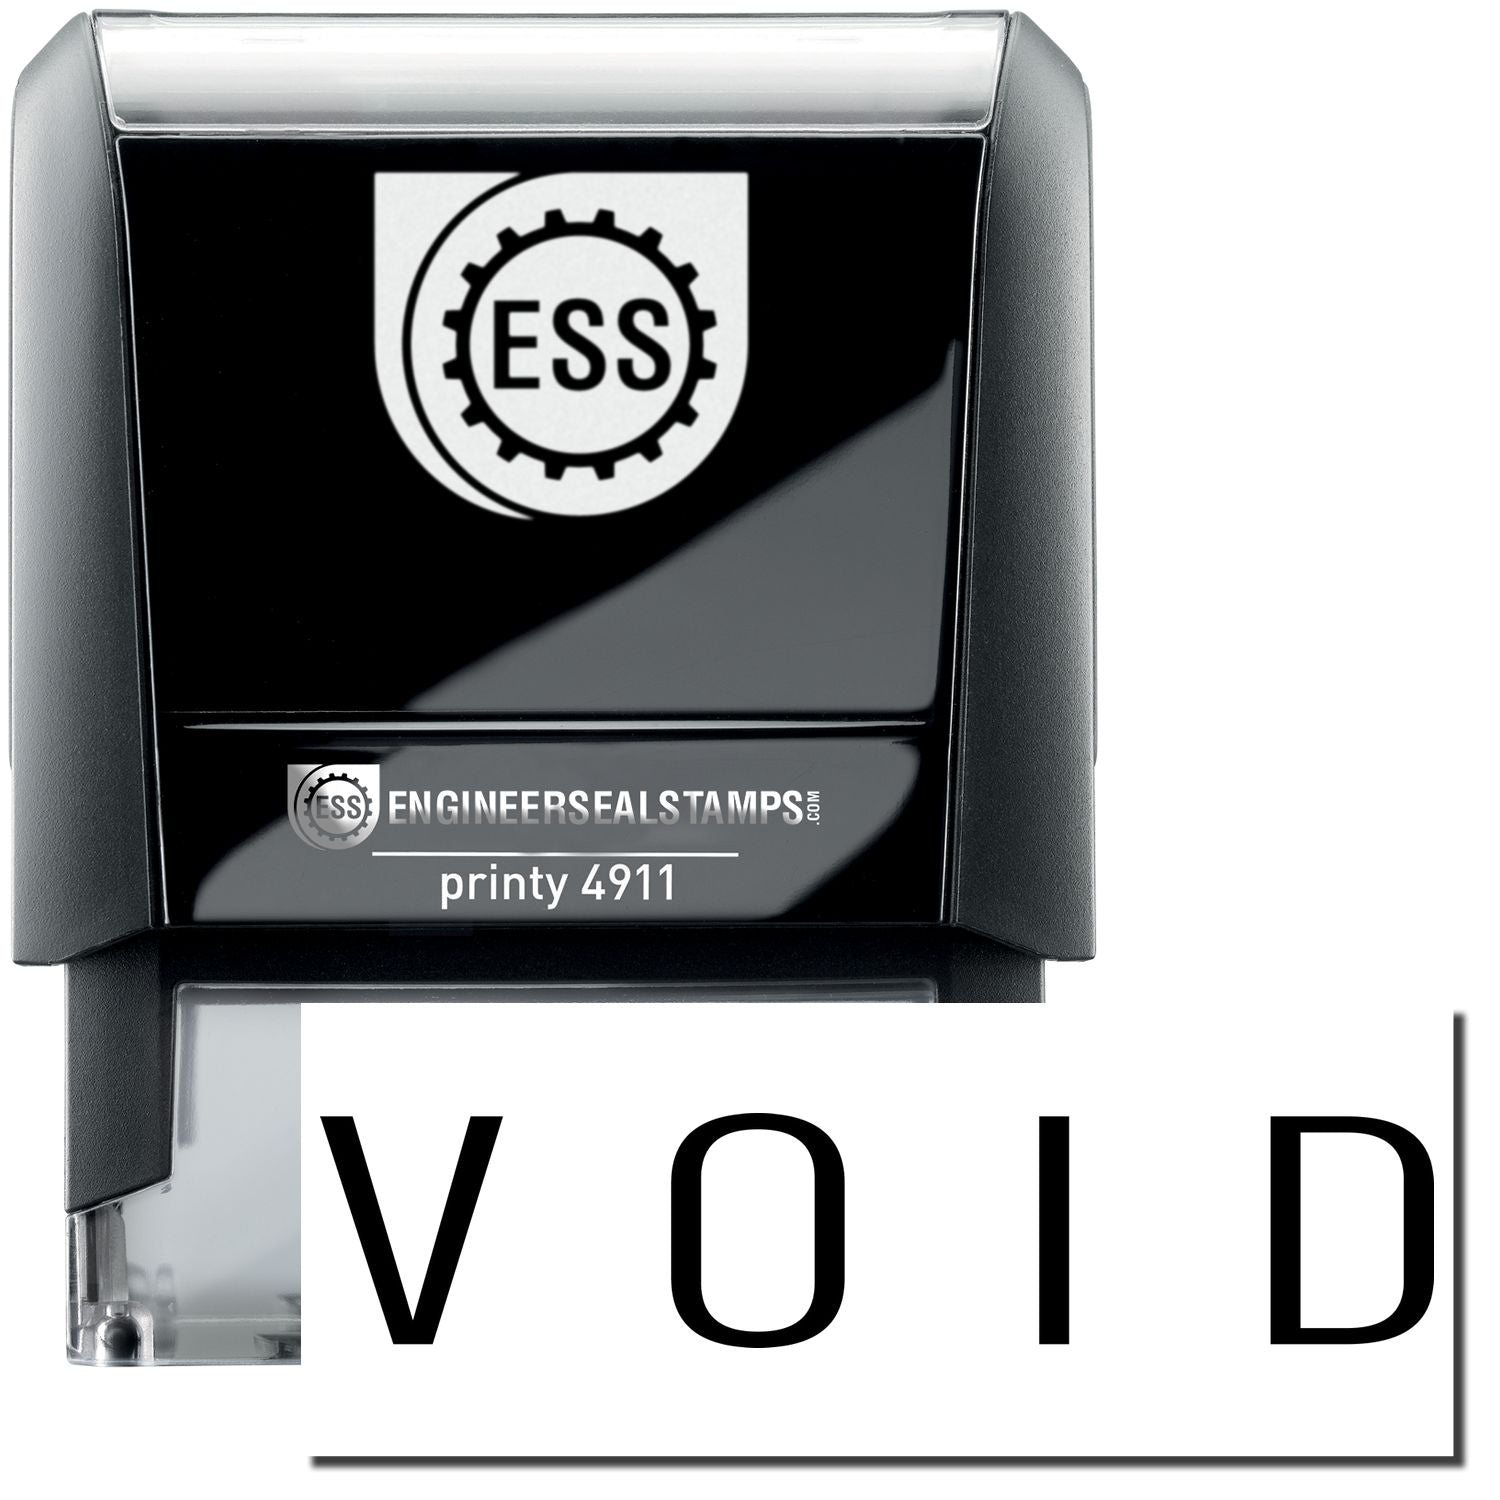 A self-inking stamp with a stamped image showing how the text "V O I D" in a narrow font is displayed after stamping.